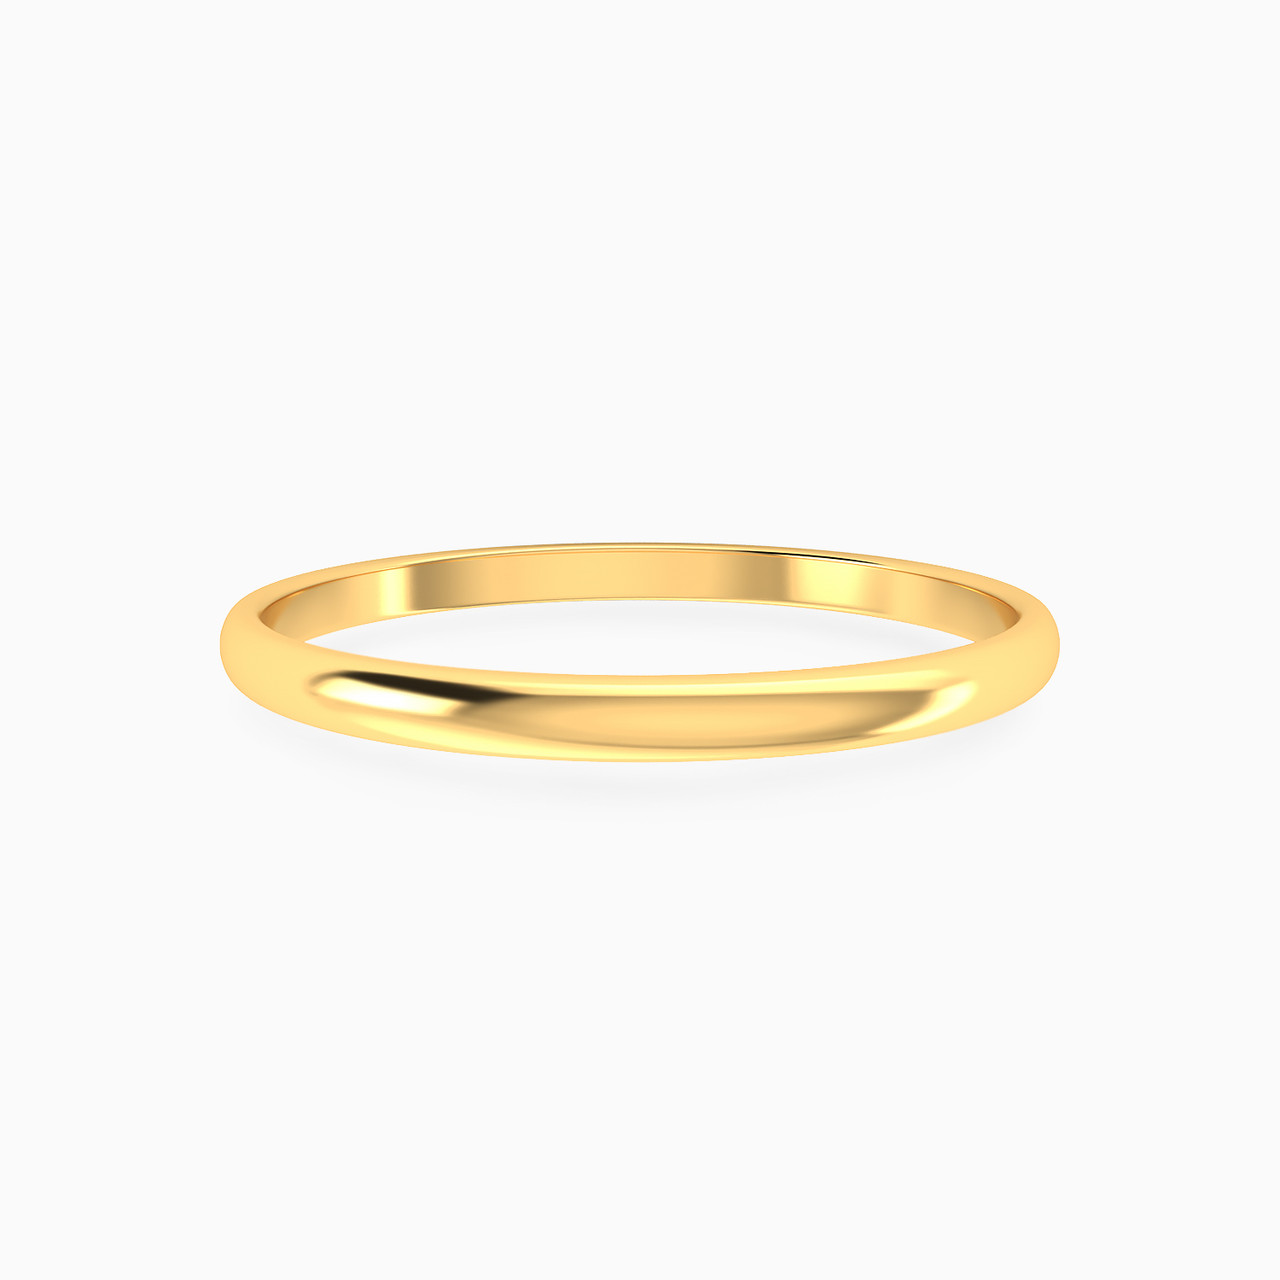 Statement Ring in 14K Gold